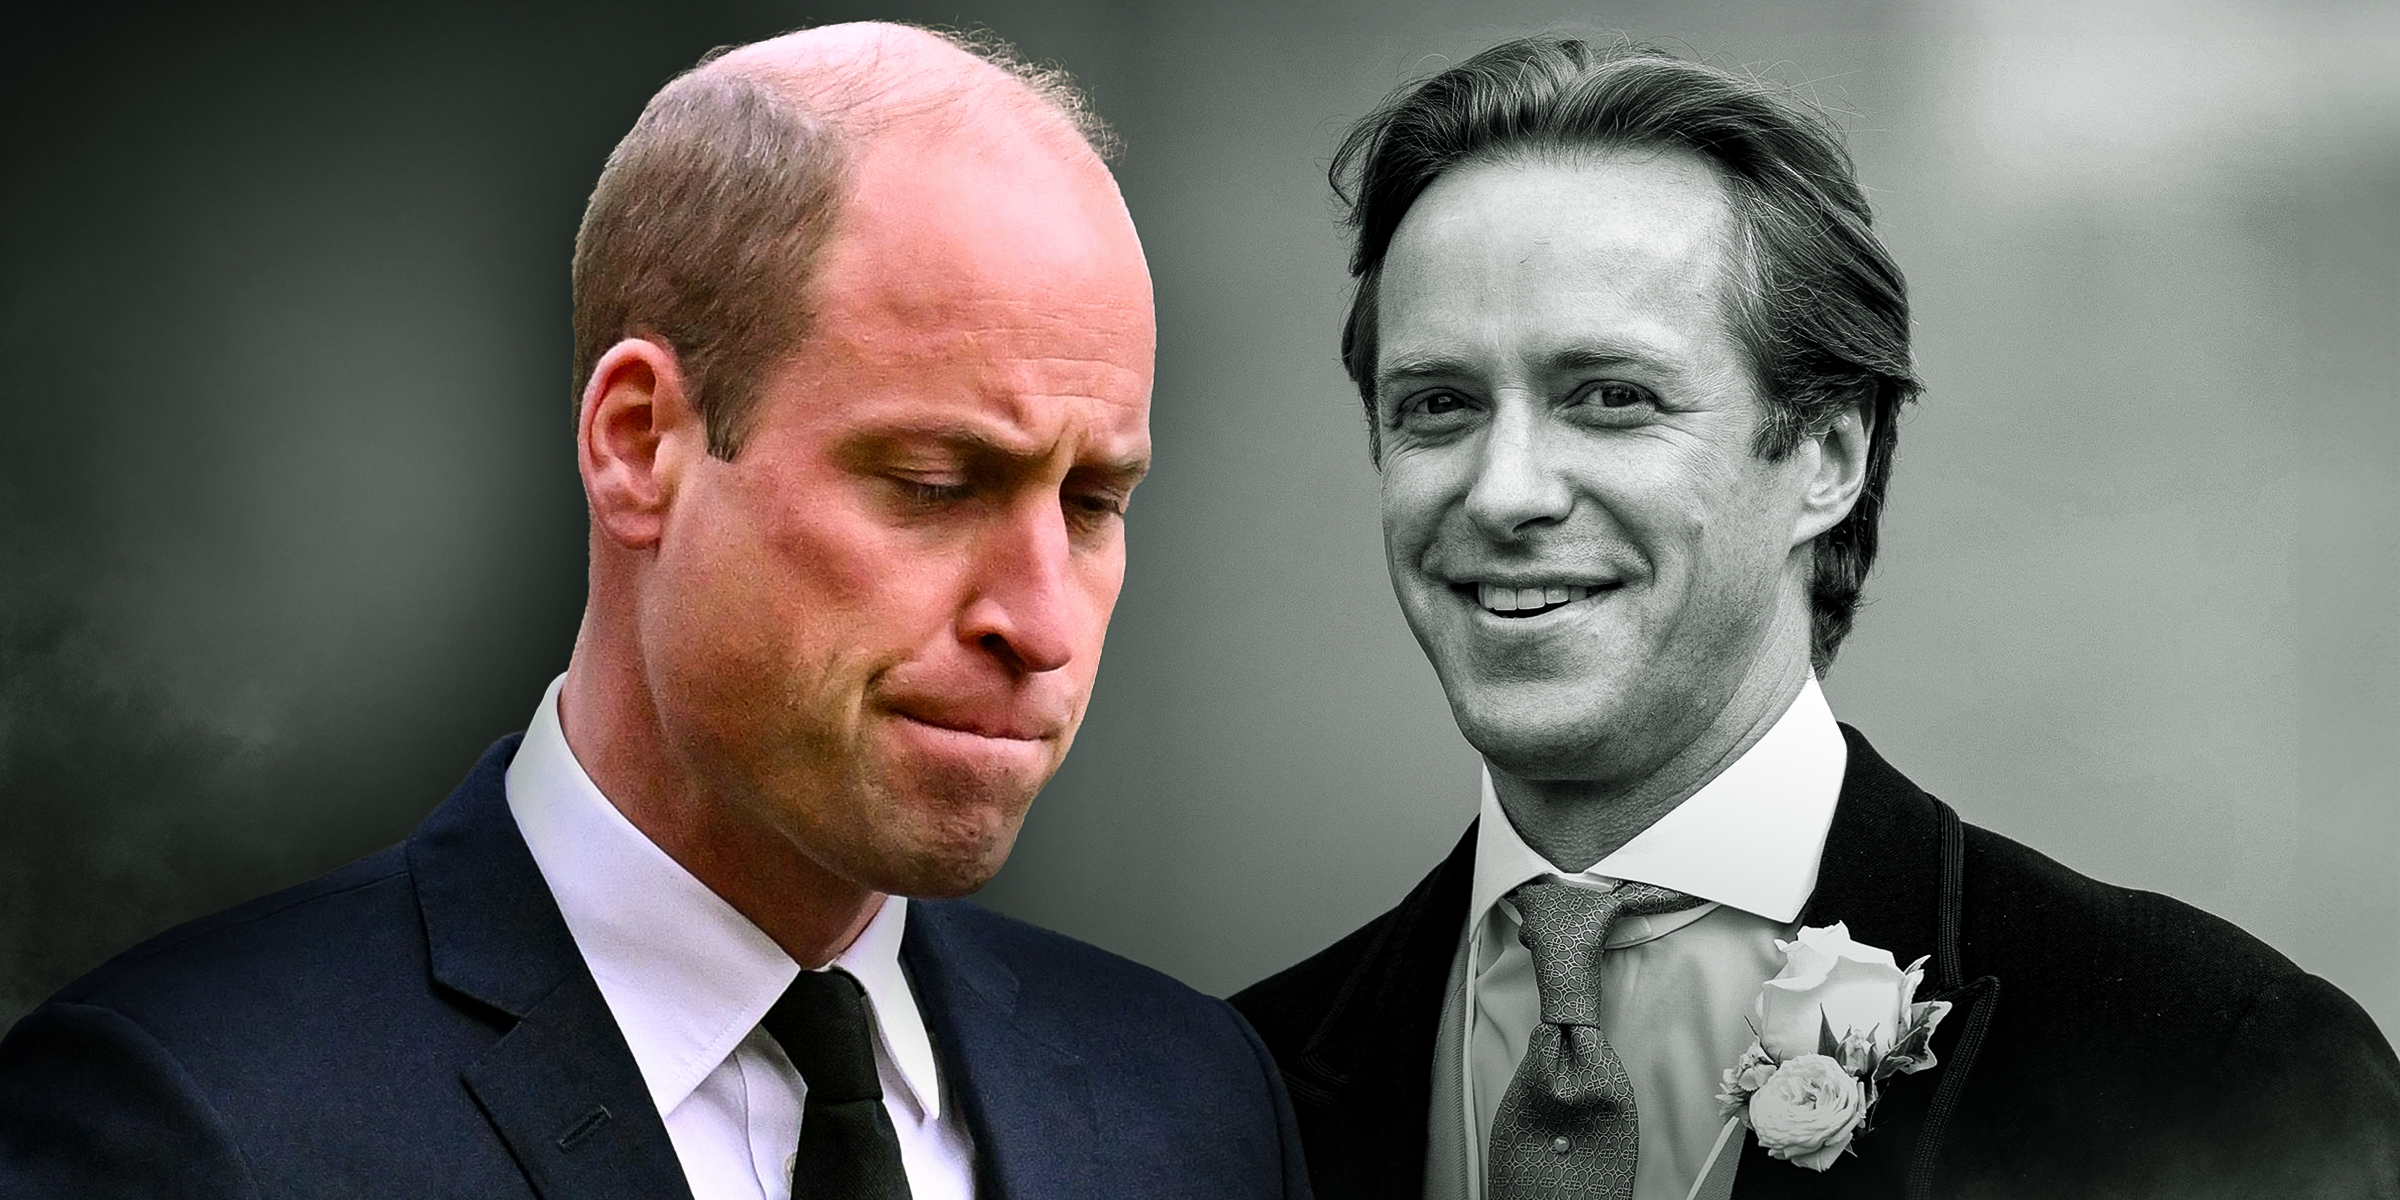 Prince William | Thomas Kingston | Source: Getty Images